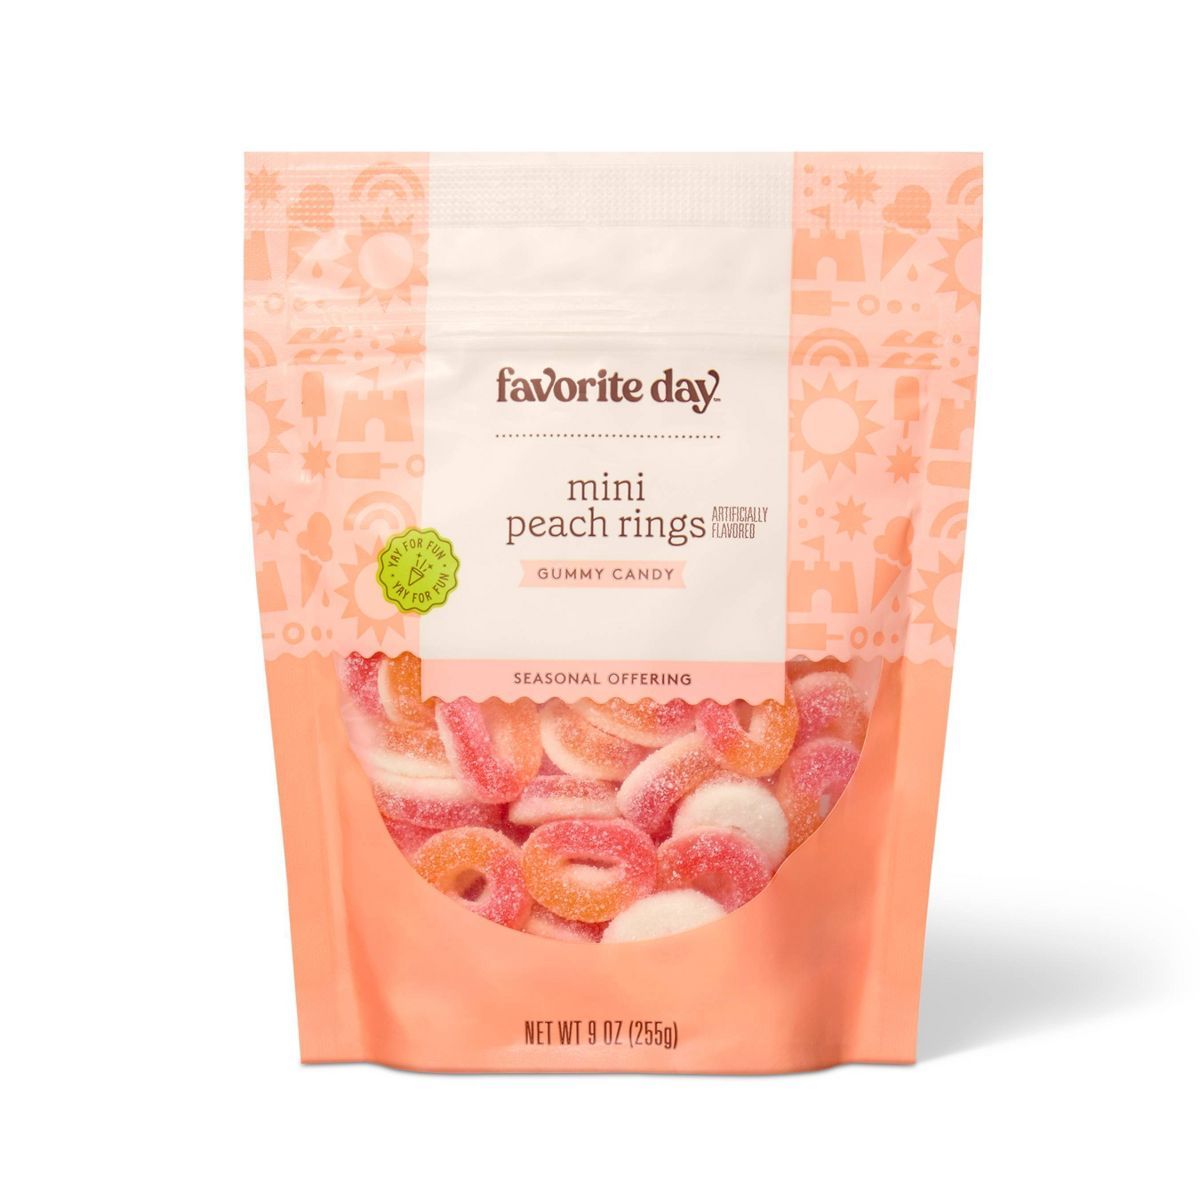 Sour Mini Peach Rings Gummy Candy Bag - 9oz - Favorite Day™ | Target